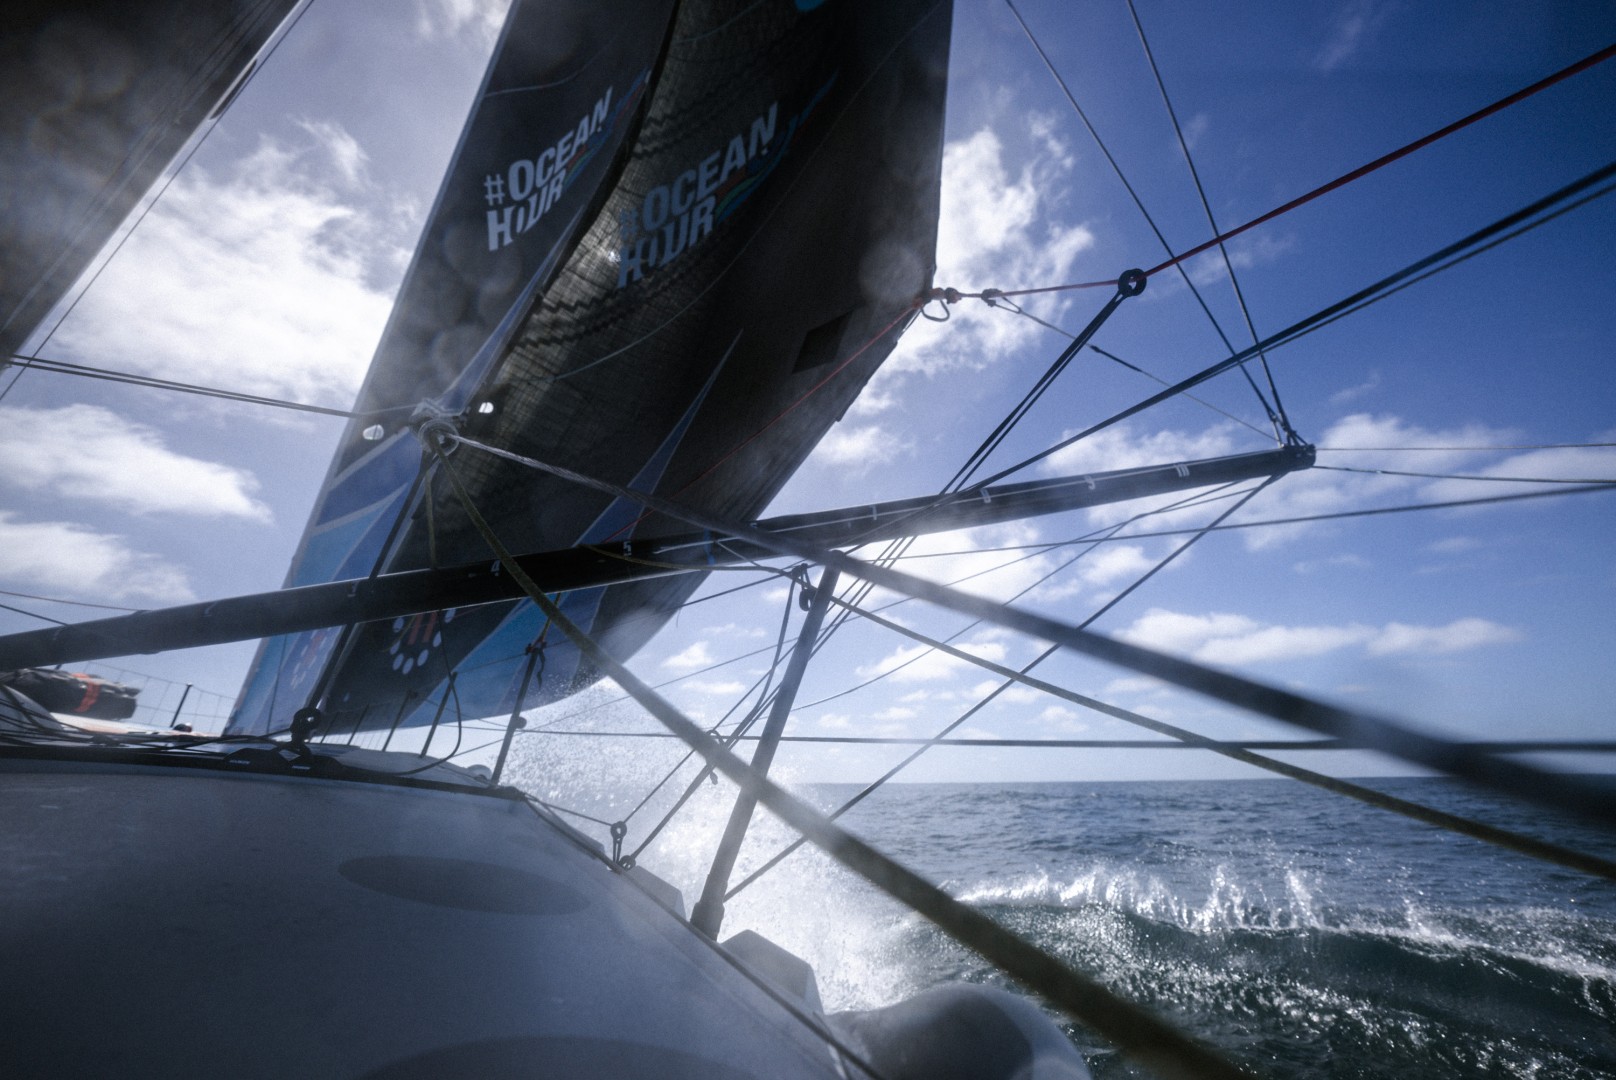 Onboard 11th Hour Racing Team during Leg 2, Day 17. Malama causing in moderate winds under J0 and J3 sails.
© Amory Ross